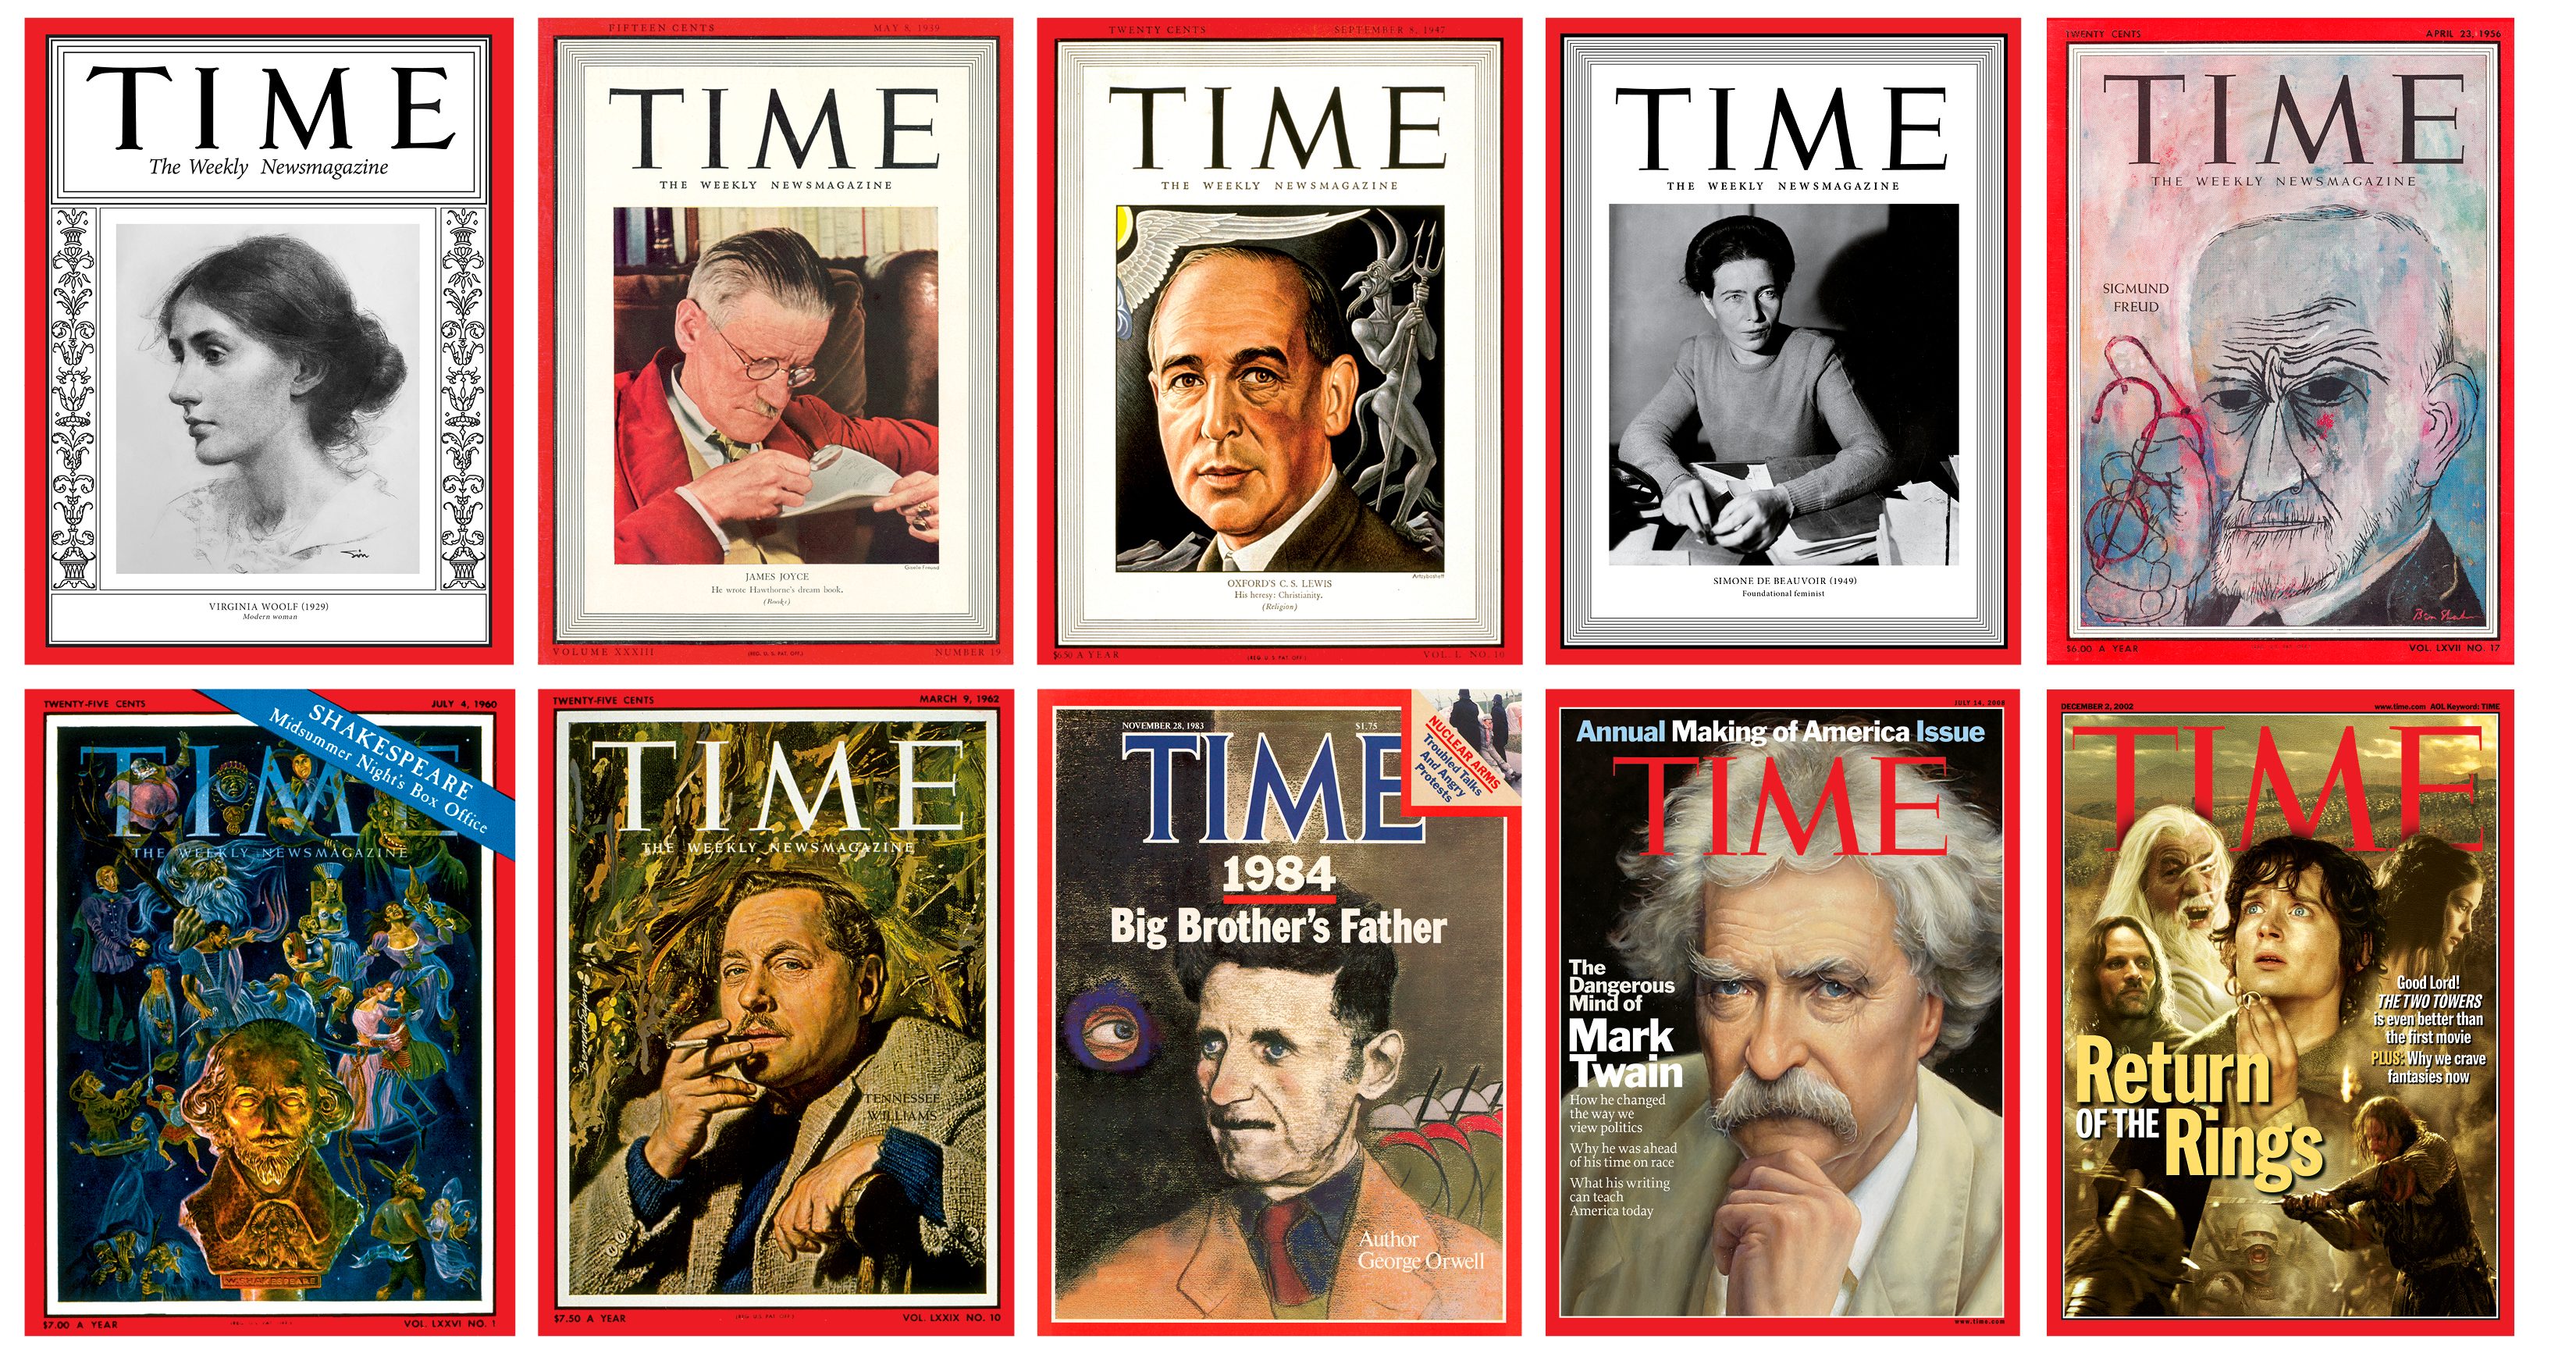 Writers on the cover of TIME who 